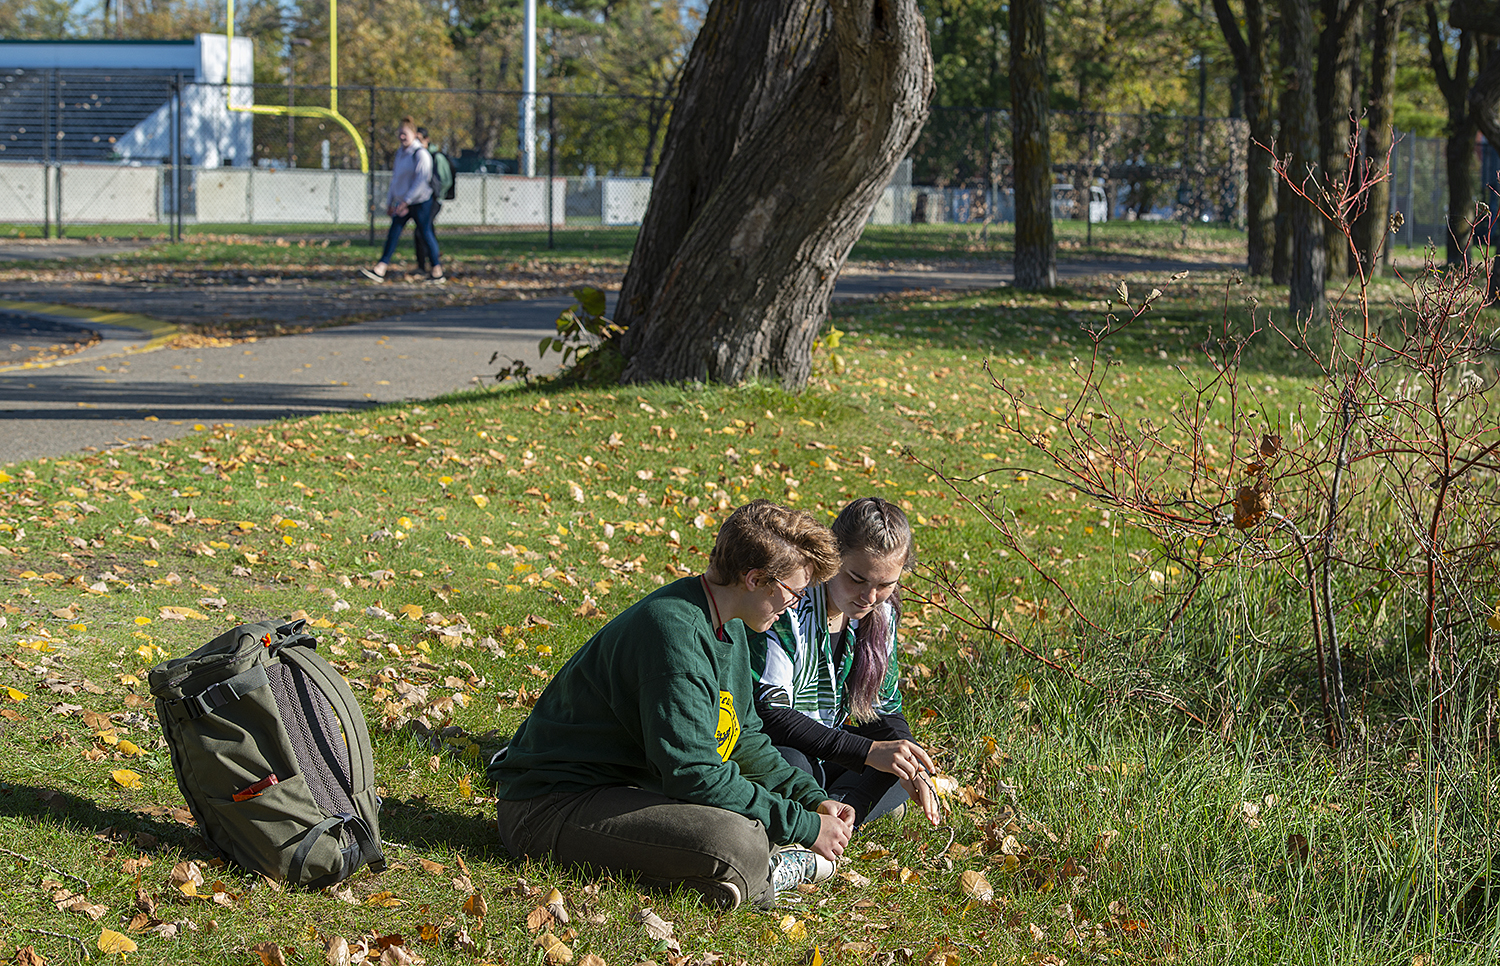 Two Bemidji State students enjoying a fall day by the lake on the Bemidji State campus